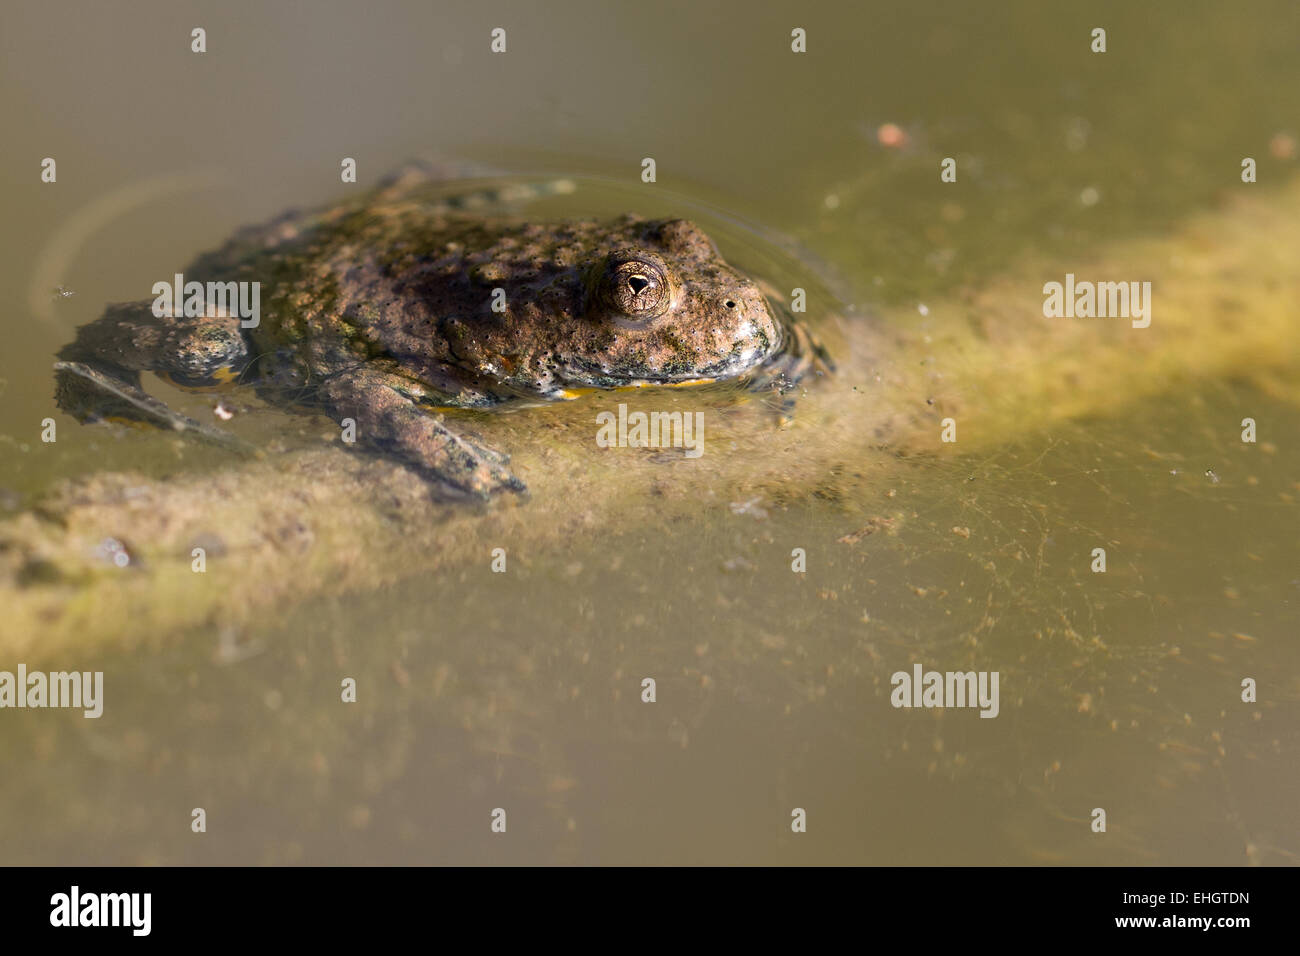 yellow-bellied toad Stock Photo